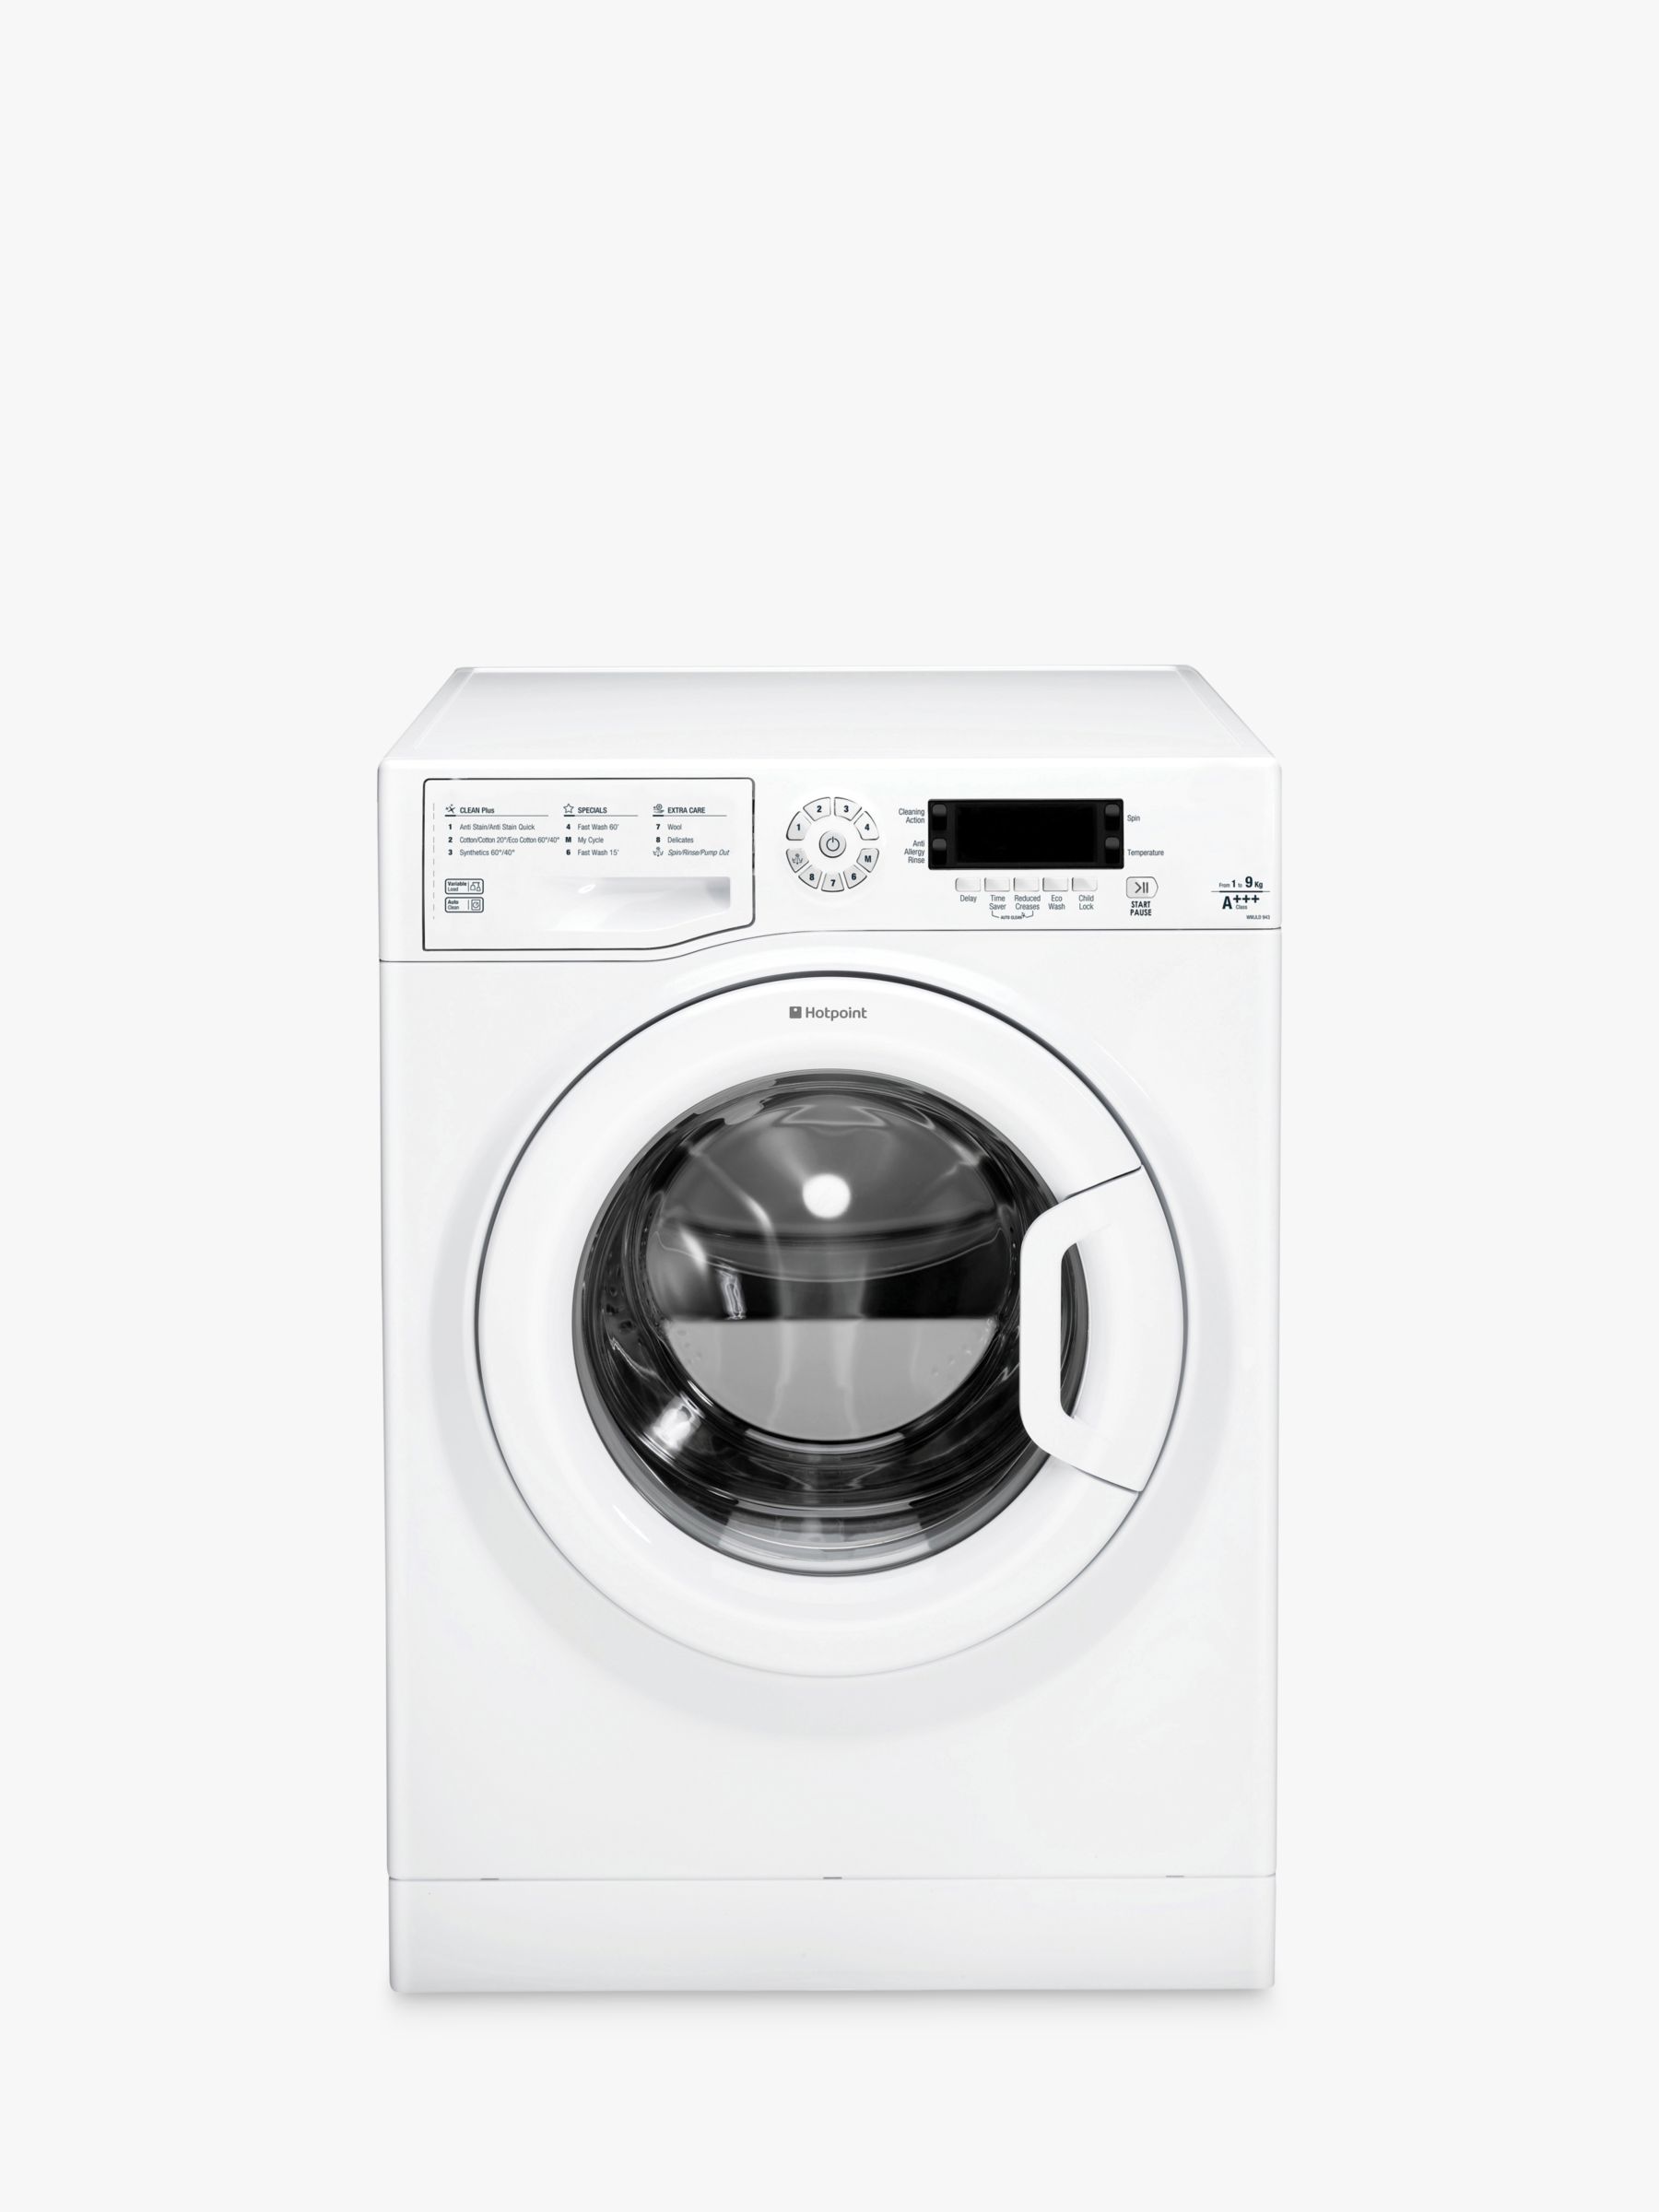 Hotpoint WMJLD943P Freestanding Washing Machine, 9kg Load, A++ Energy Rating, 1400rpm Spin in White